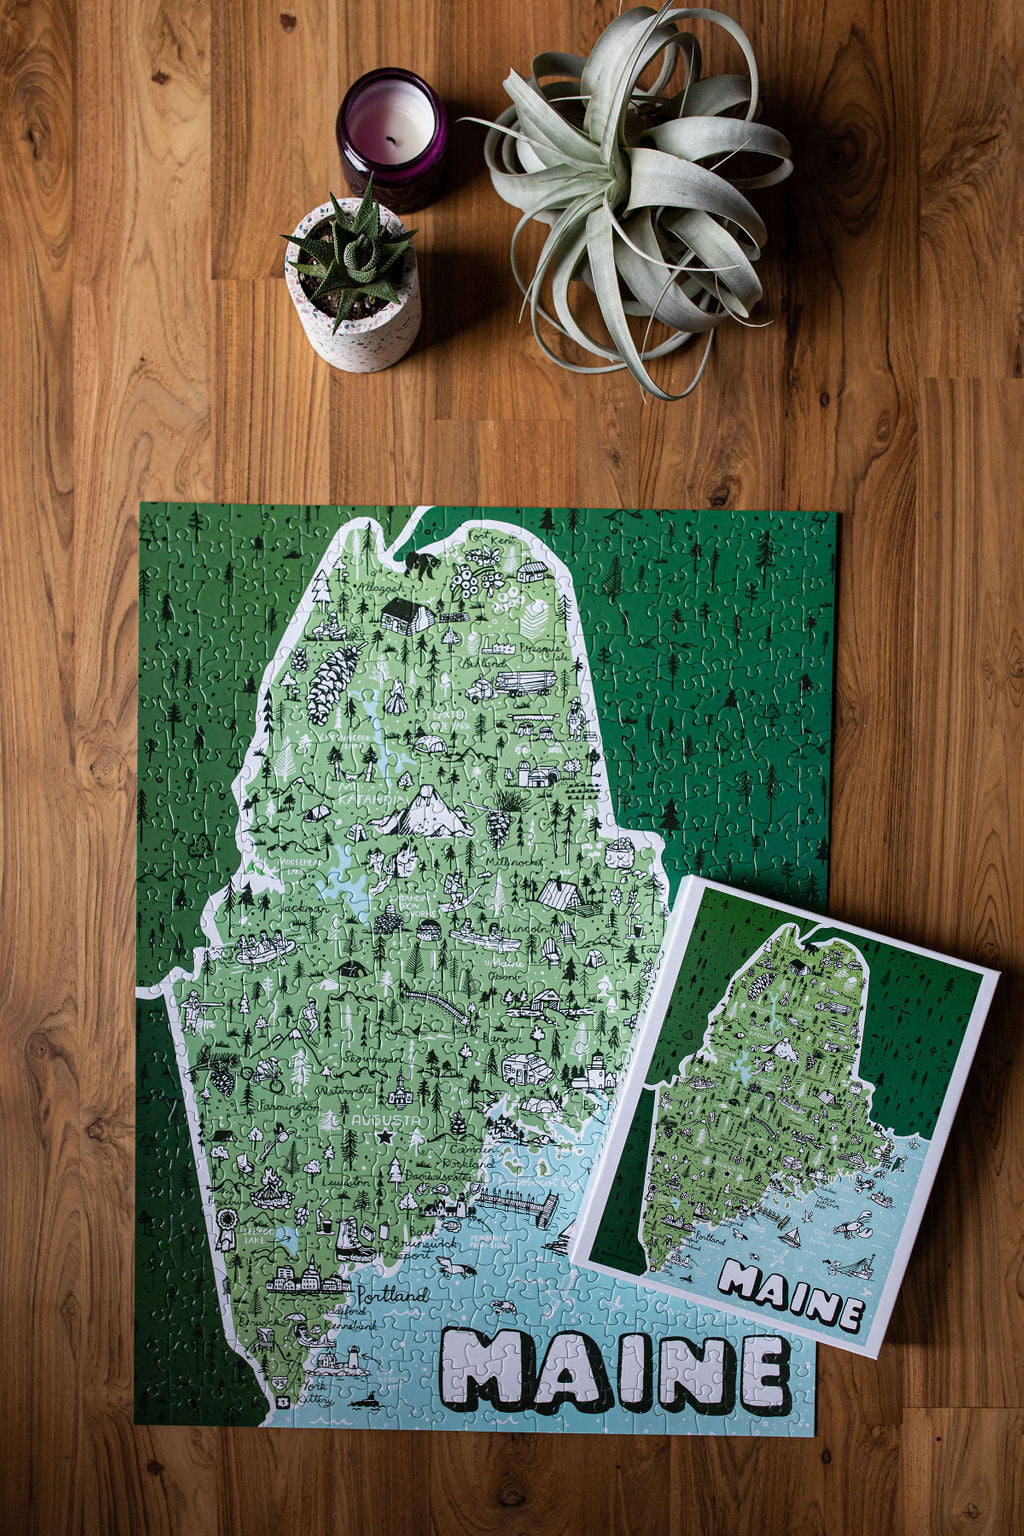 State of Maine Jigsaw Puzzle by Brainstorm